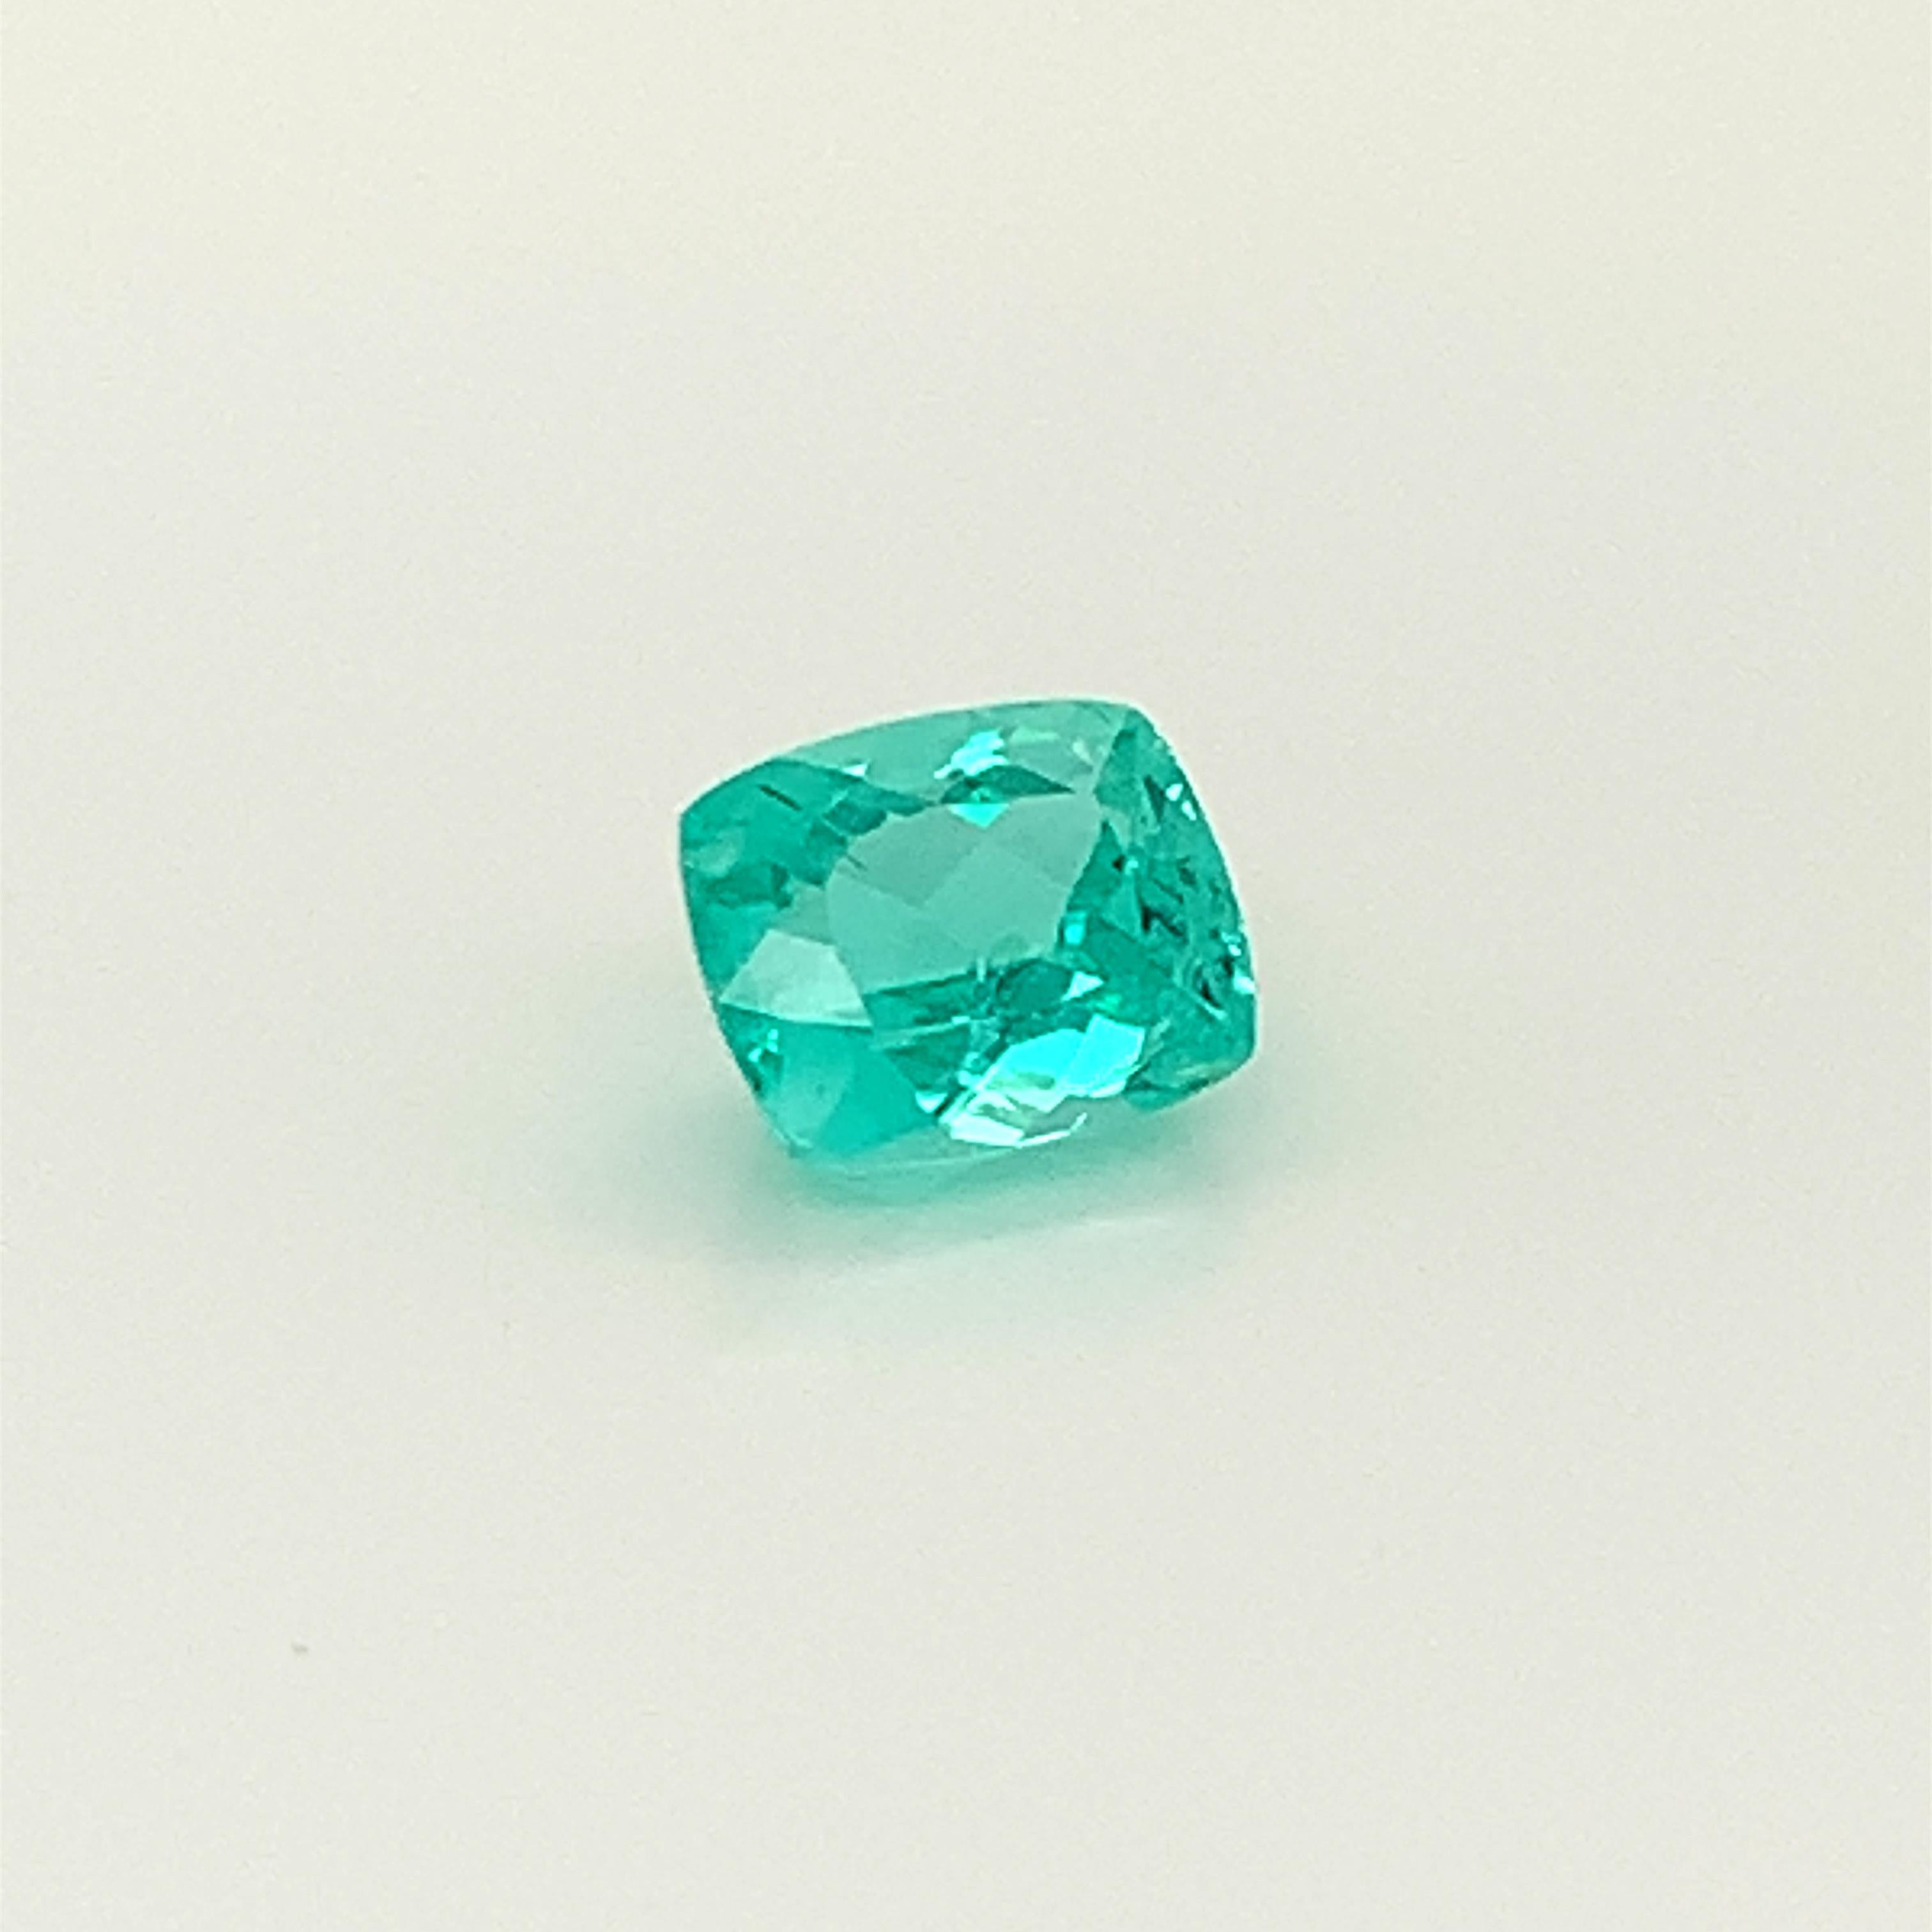 Paraiba Tourmaline cushion cut stone weighing a total of 1,99 Carats, offered loose to create an unique design.
its certificate says that it comes from Mozambique.
Dimension : 7.99 x 6.67 x 4.82
The stone is shiny with a vibrant green blue color.

